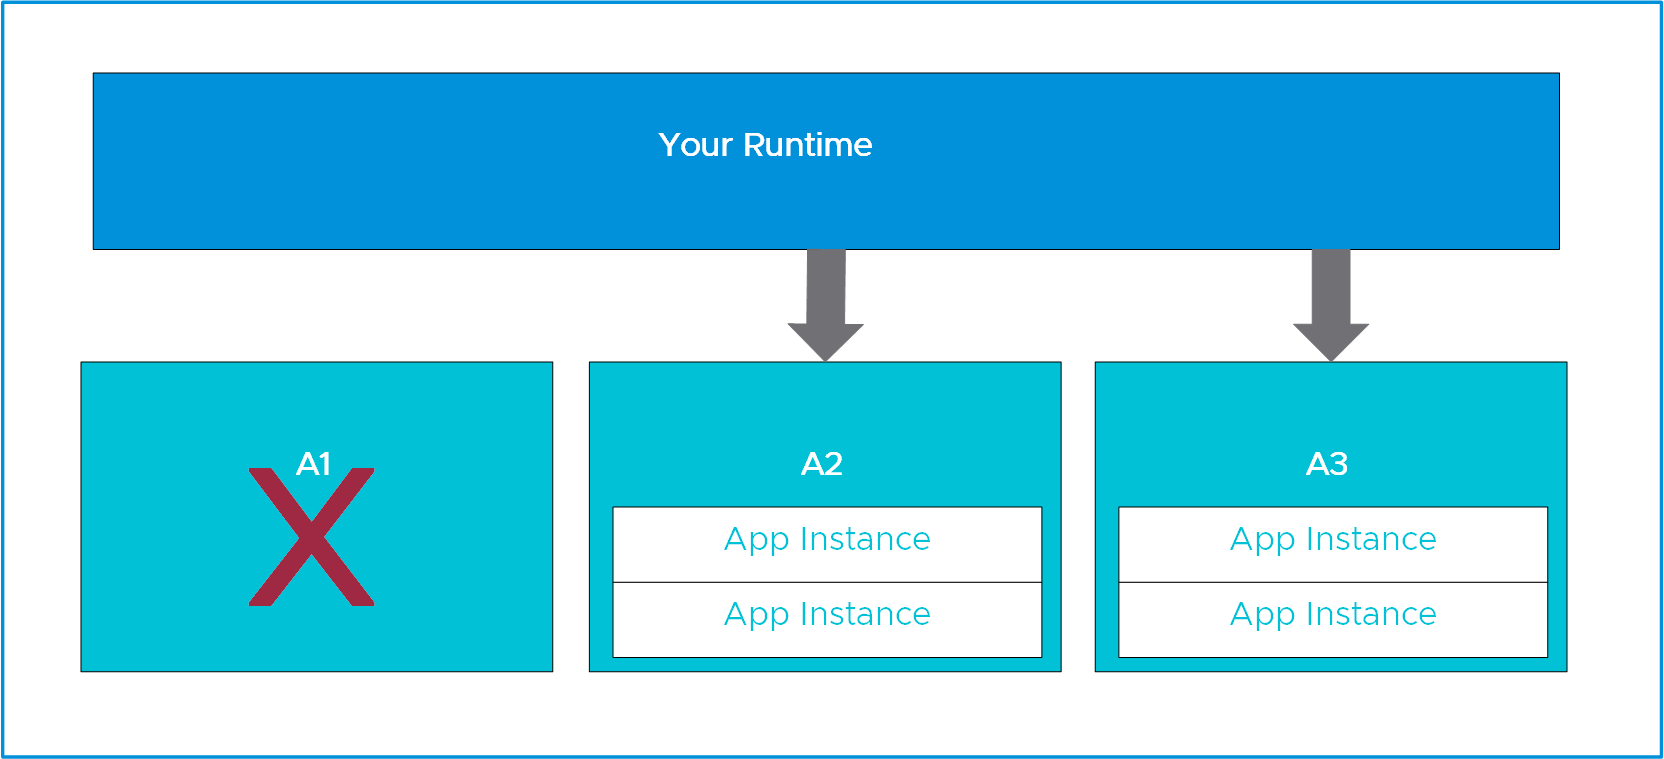 A box labeled Your Runtime, above three boxes A1, A2, and A3. A1 is inactive with no App Instances. A2 and A3 contain one available App Instance each.